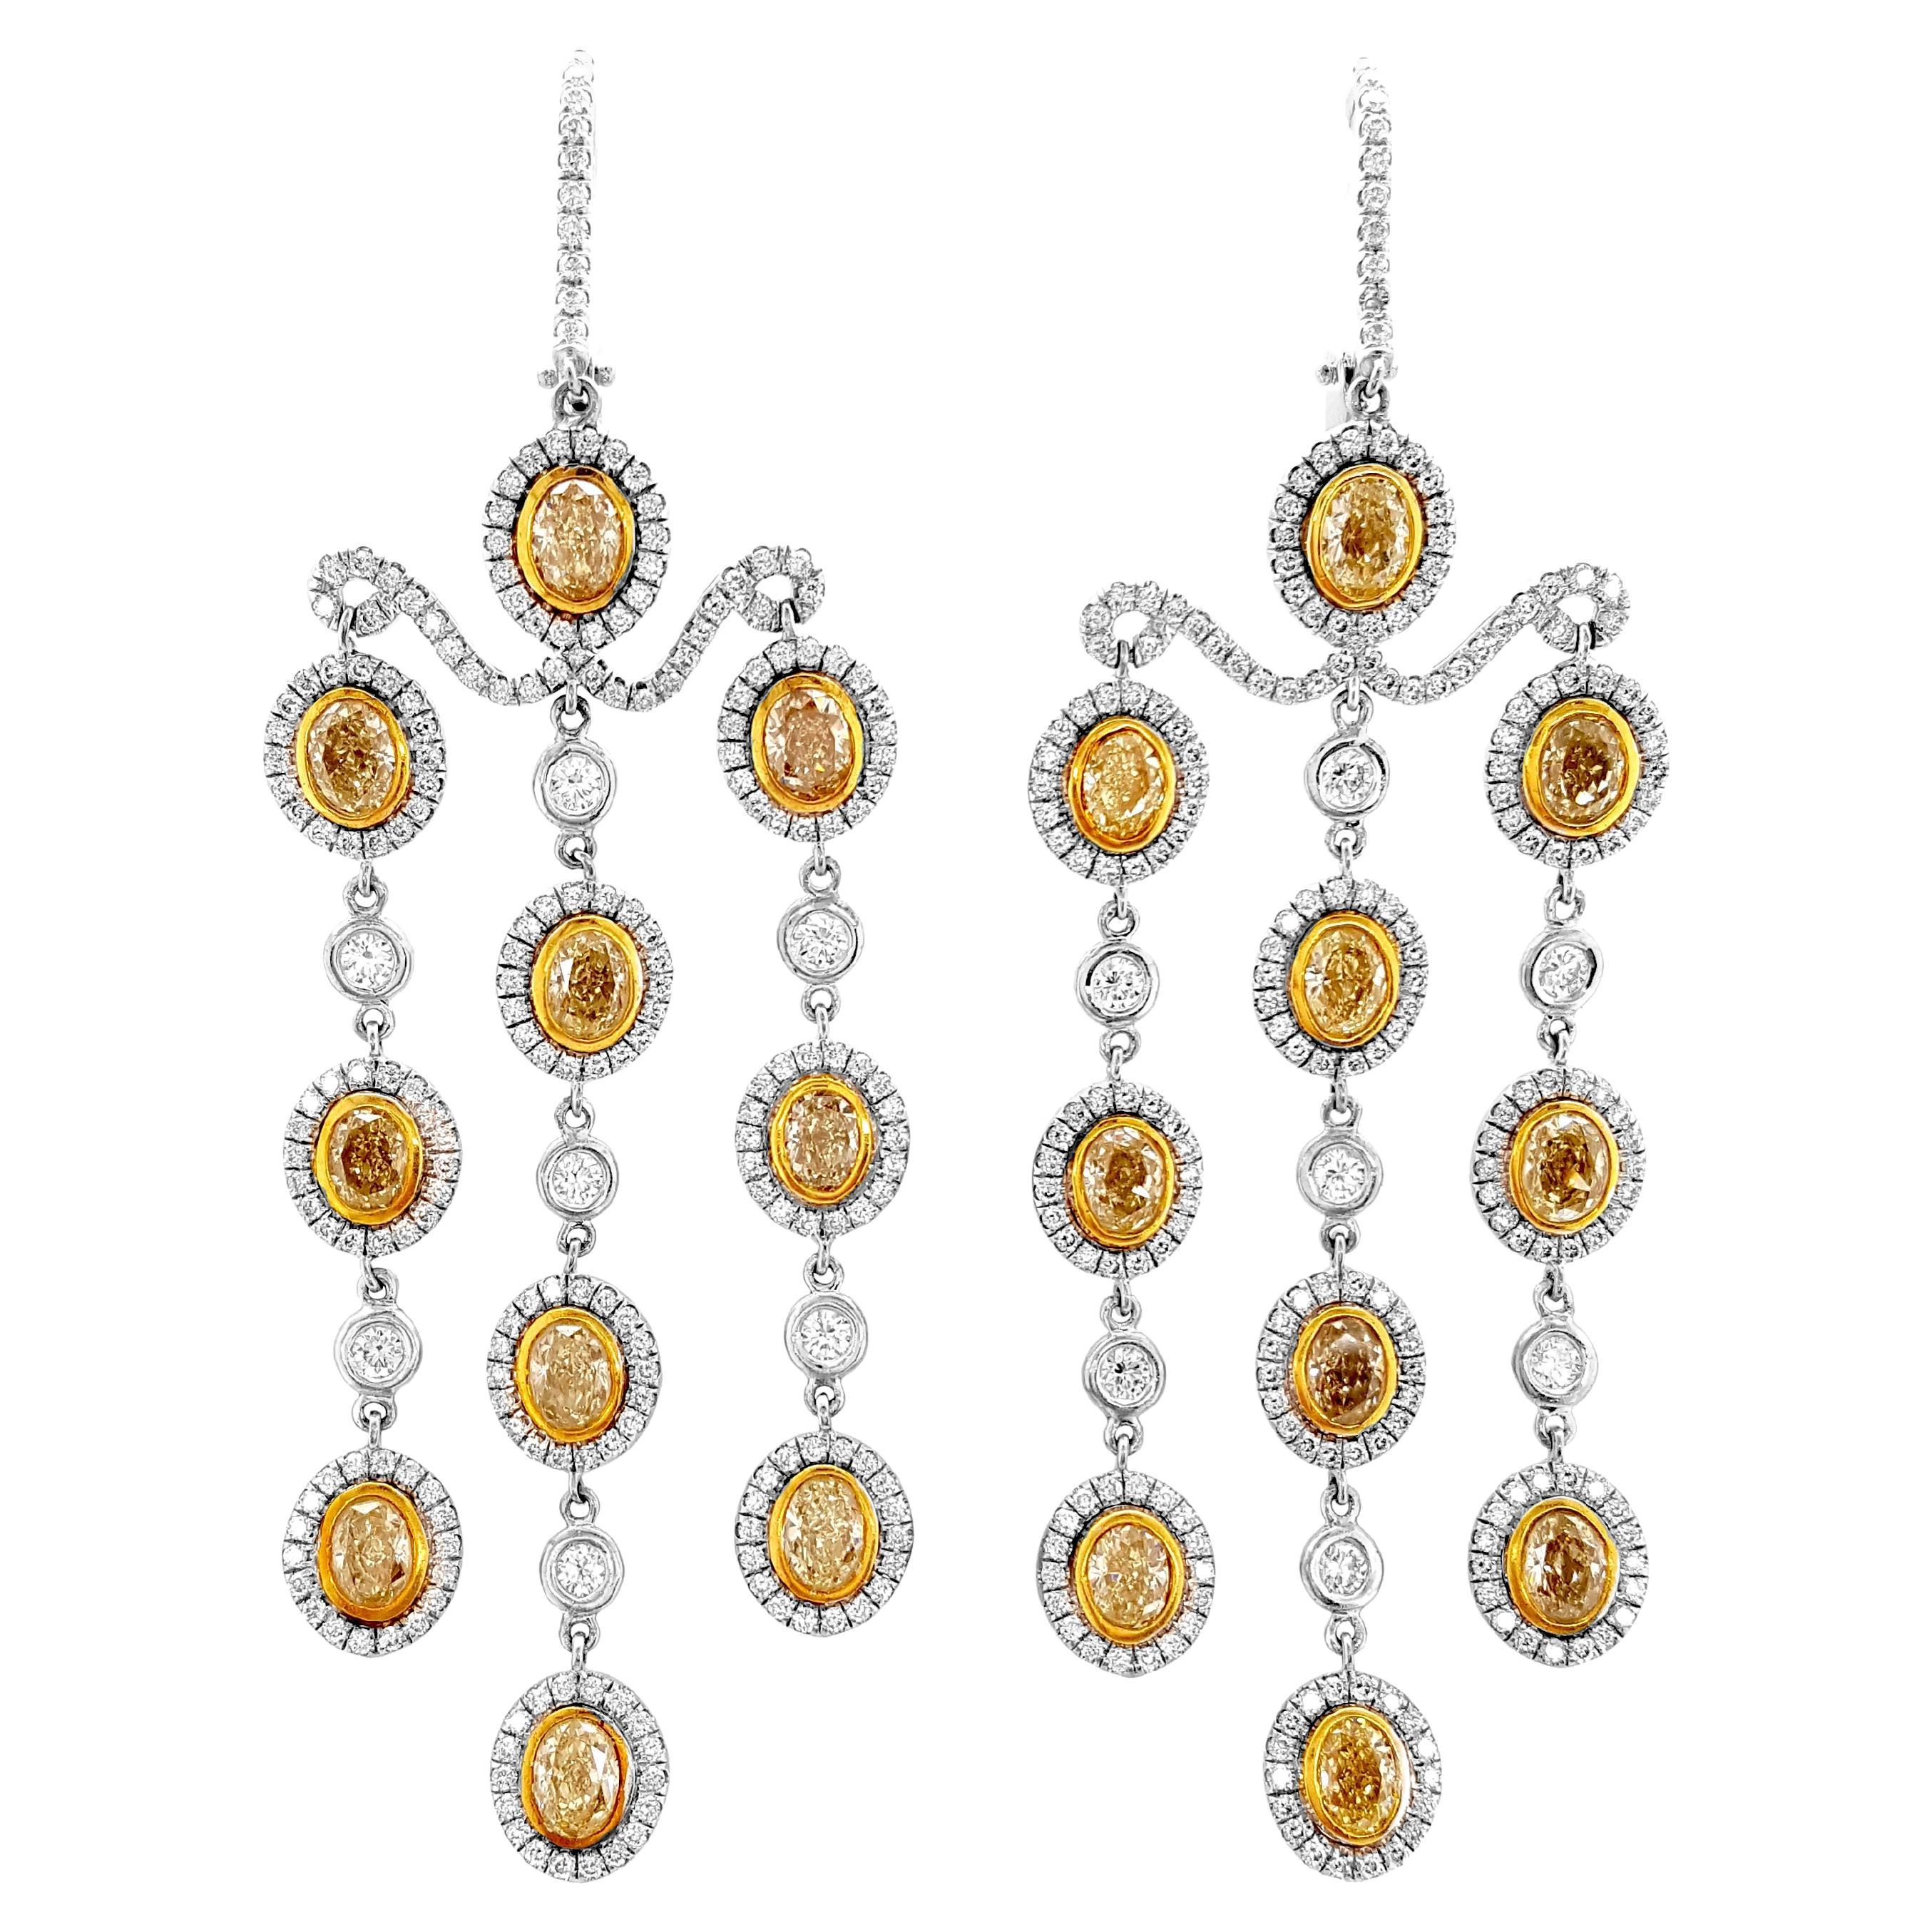 7 Carat Yellow and White Diamond Chandelier Drop Earrings Set In White Gold.